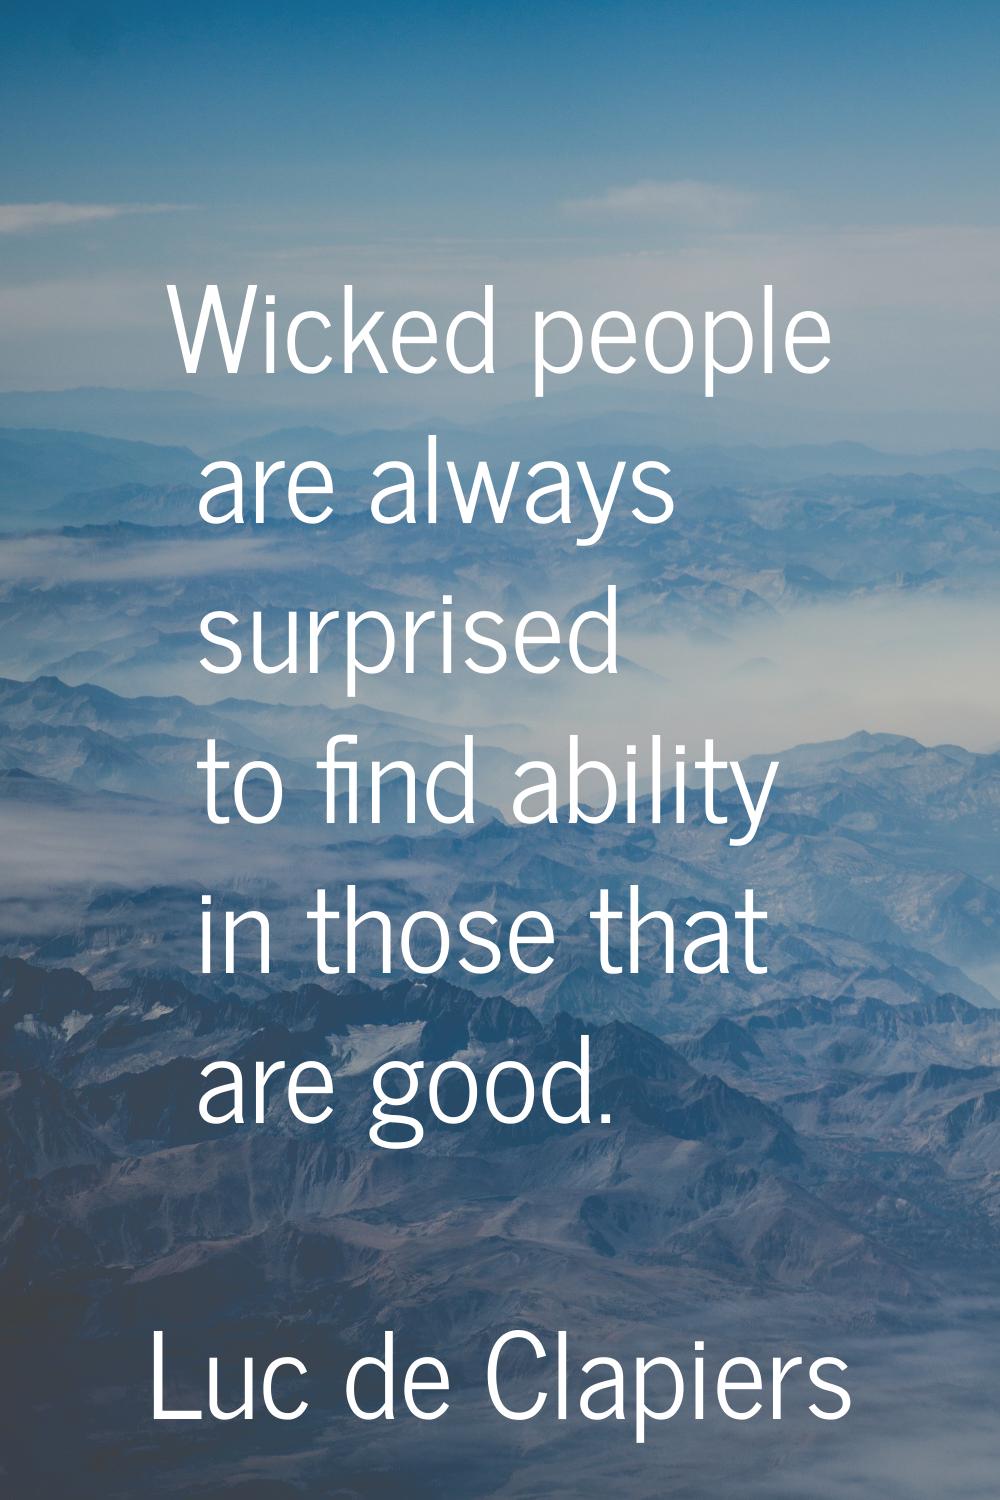 Wicked people are always surprised to find ability in those that are good.